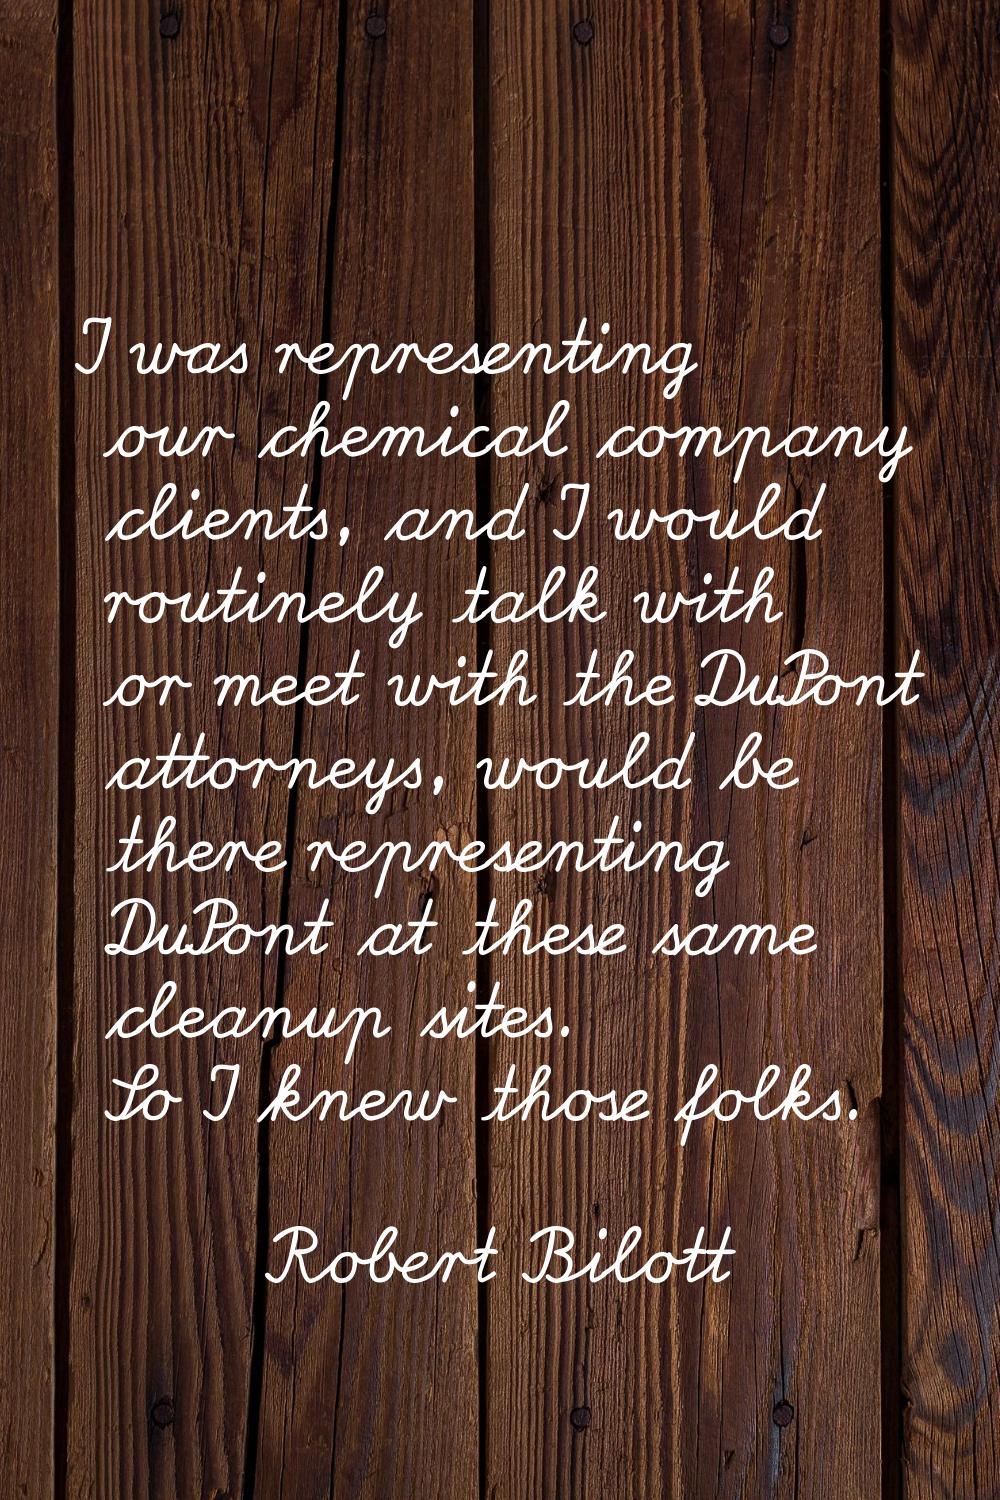 I was representing our chemical company clients, and I would routinely talk with or meet with the D